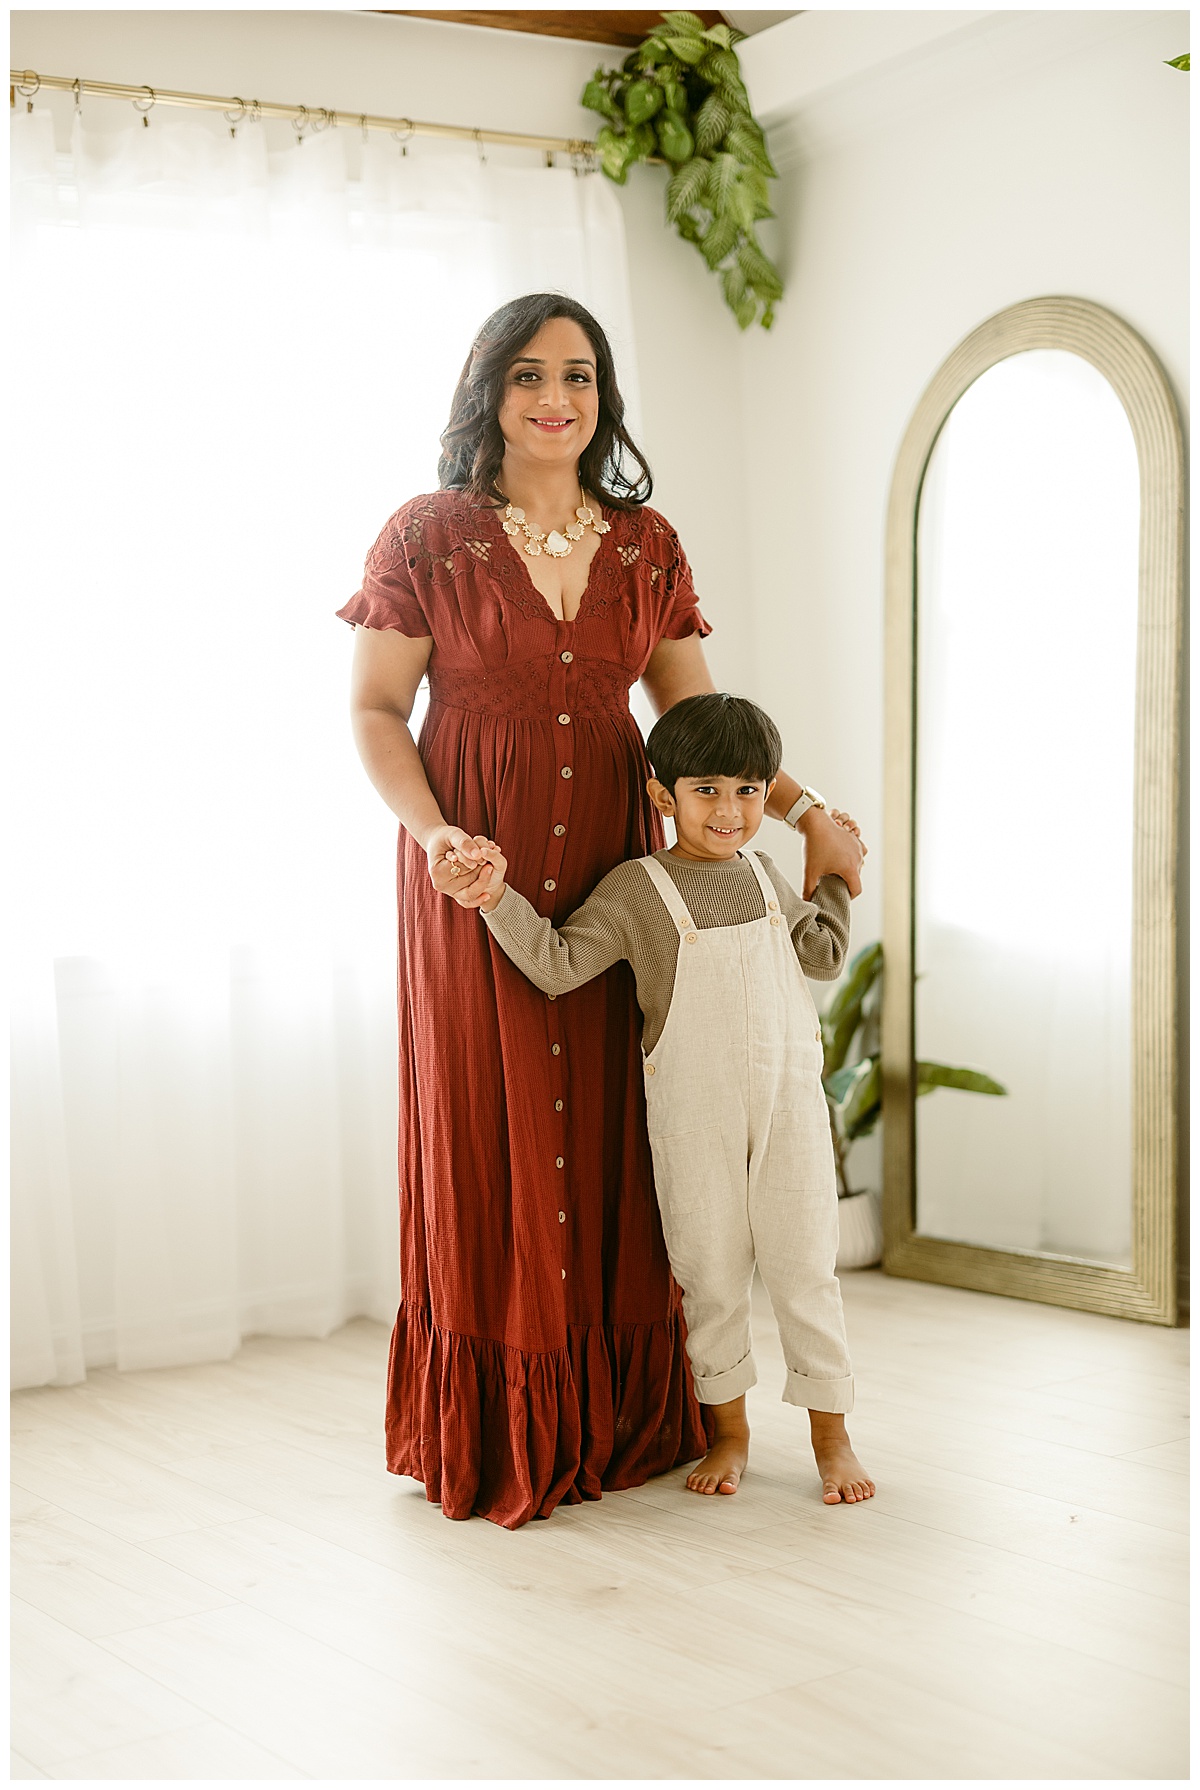 Mom holds son close during their Unposed Lifestyle Shoot